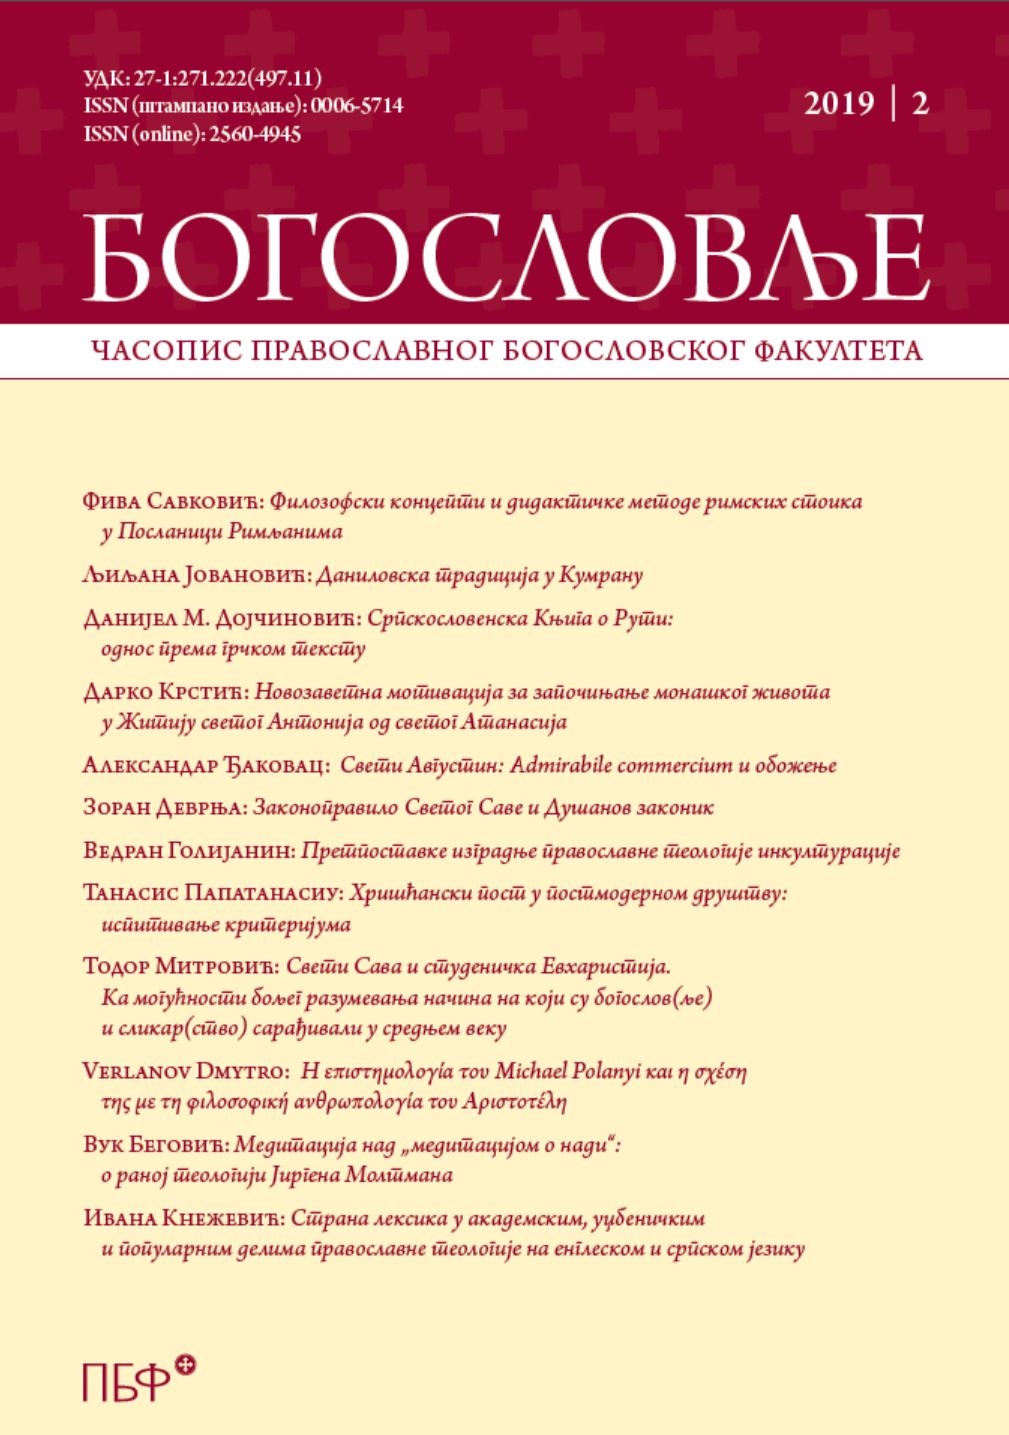 Foreign Lexics in Scientific Proper, Scientific-educational
and Scientific-popular Works of Orthodox Theology
in English and Serbian Languages Cover Image